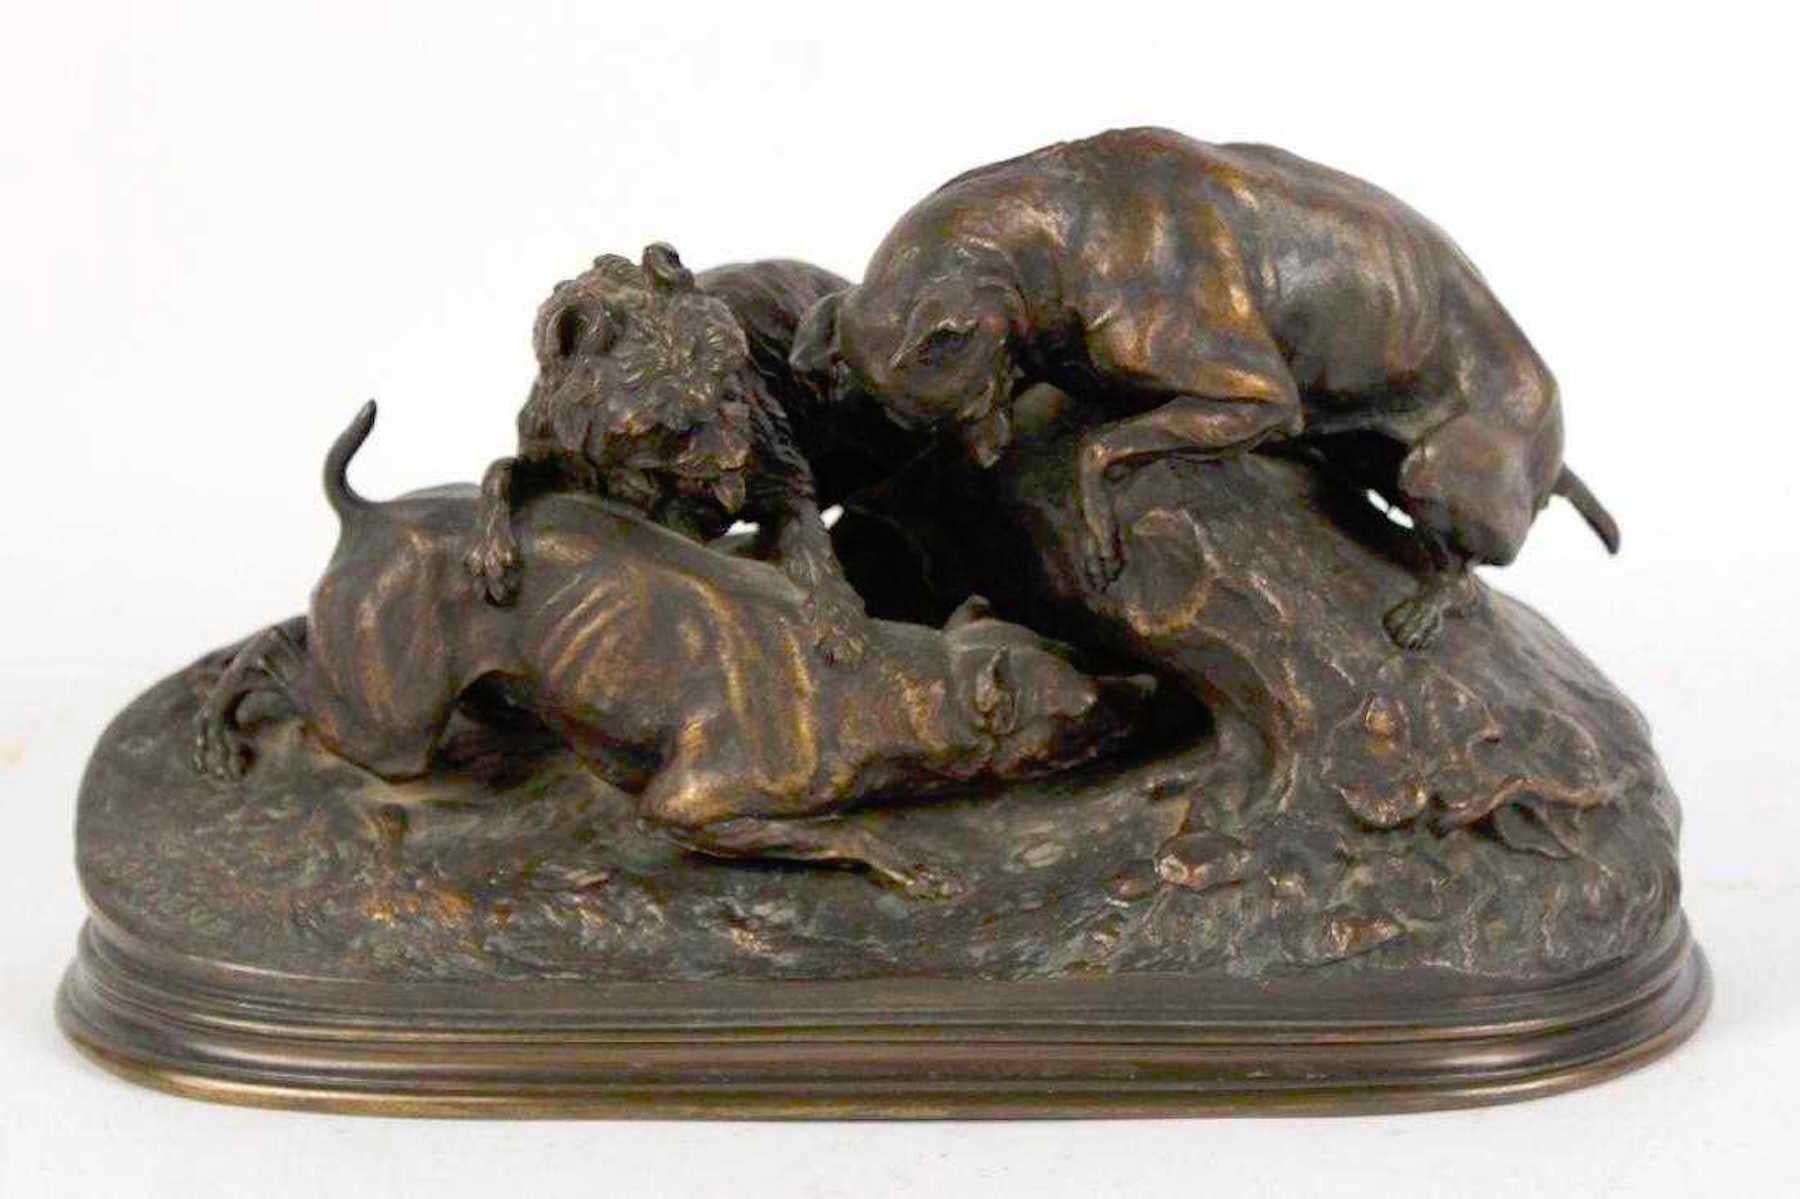 Pierre-Jules Mêne, French, 1810-1879
Three dogs burrowing ‘Chase au Lapin’
French sculptor and animalière. He is considered one of the pioneers of animal sculpture in the 19th century
Inscribed P.J. Mene at the base
Bronze with black-brown